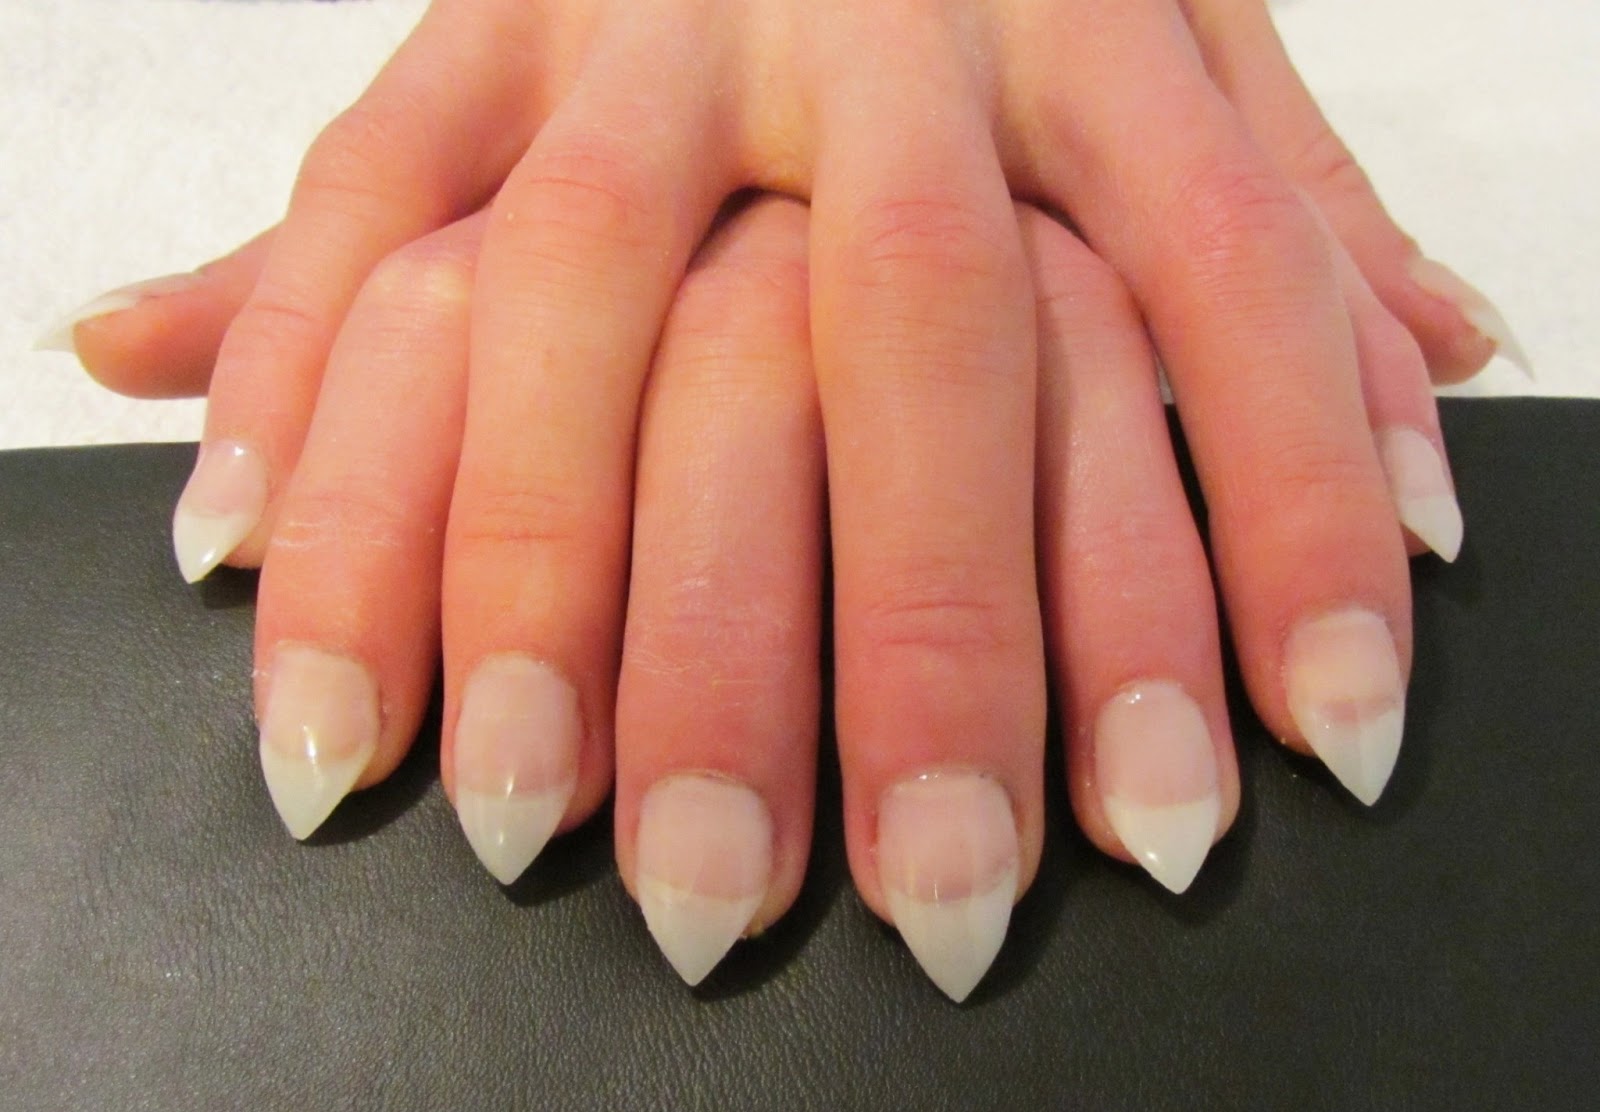 5. Pointed Acrylic Nails on Pinterest - wide 4